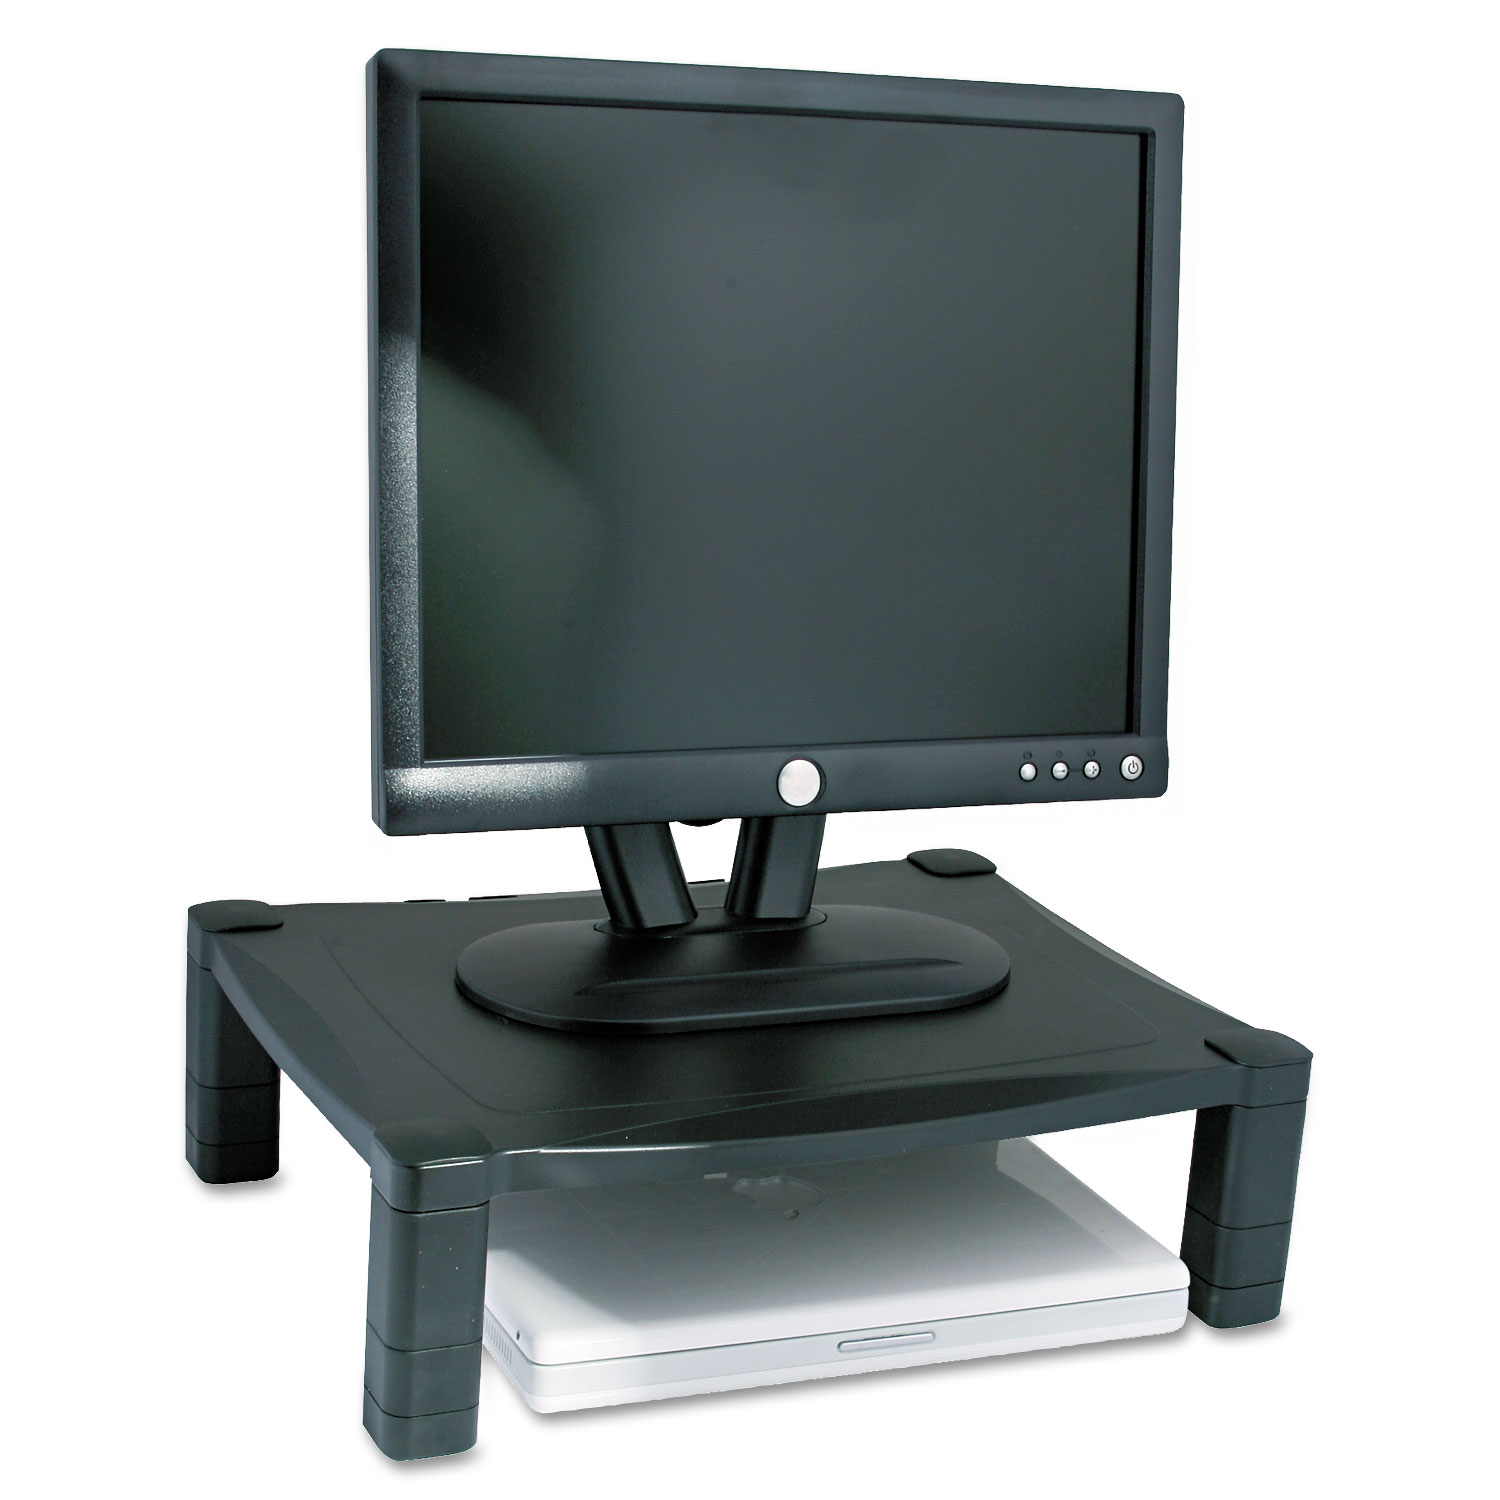  Kantek MS400 Single Level Height-Adjustable Stand, 17 x 13 1/4 x 3 to 6 1/2, Black (KTKMS400) 